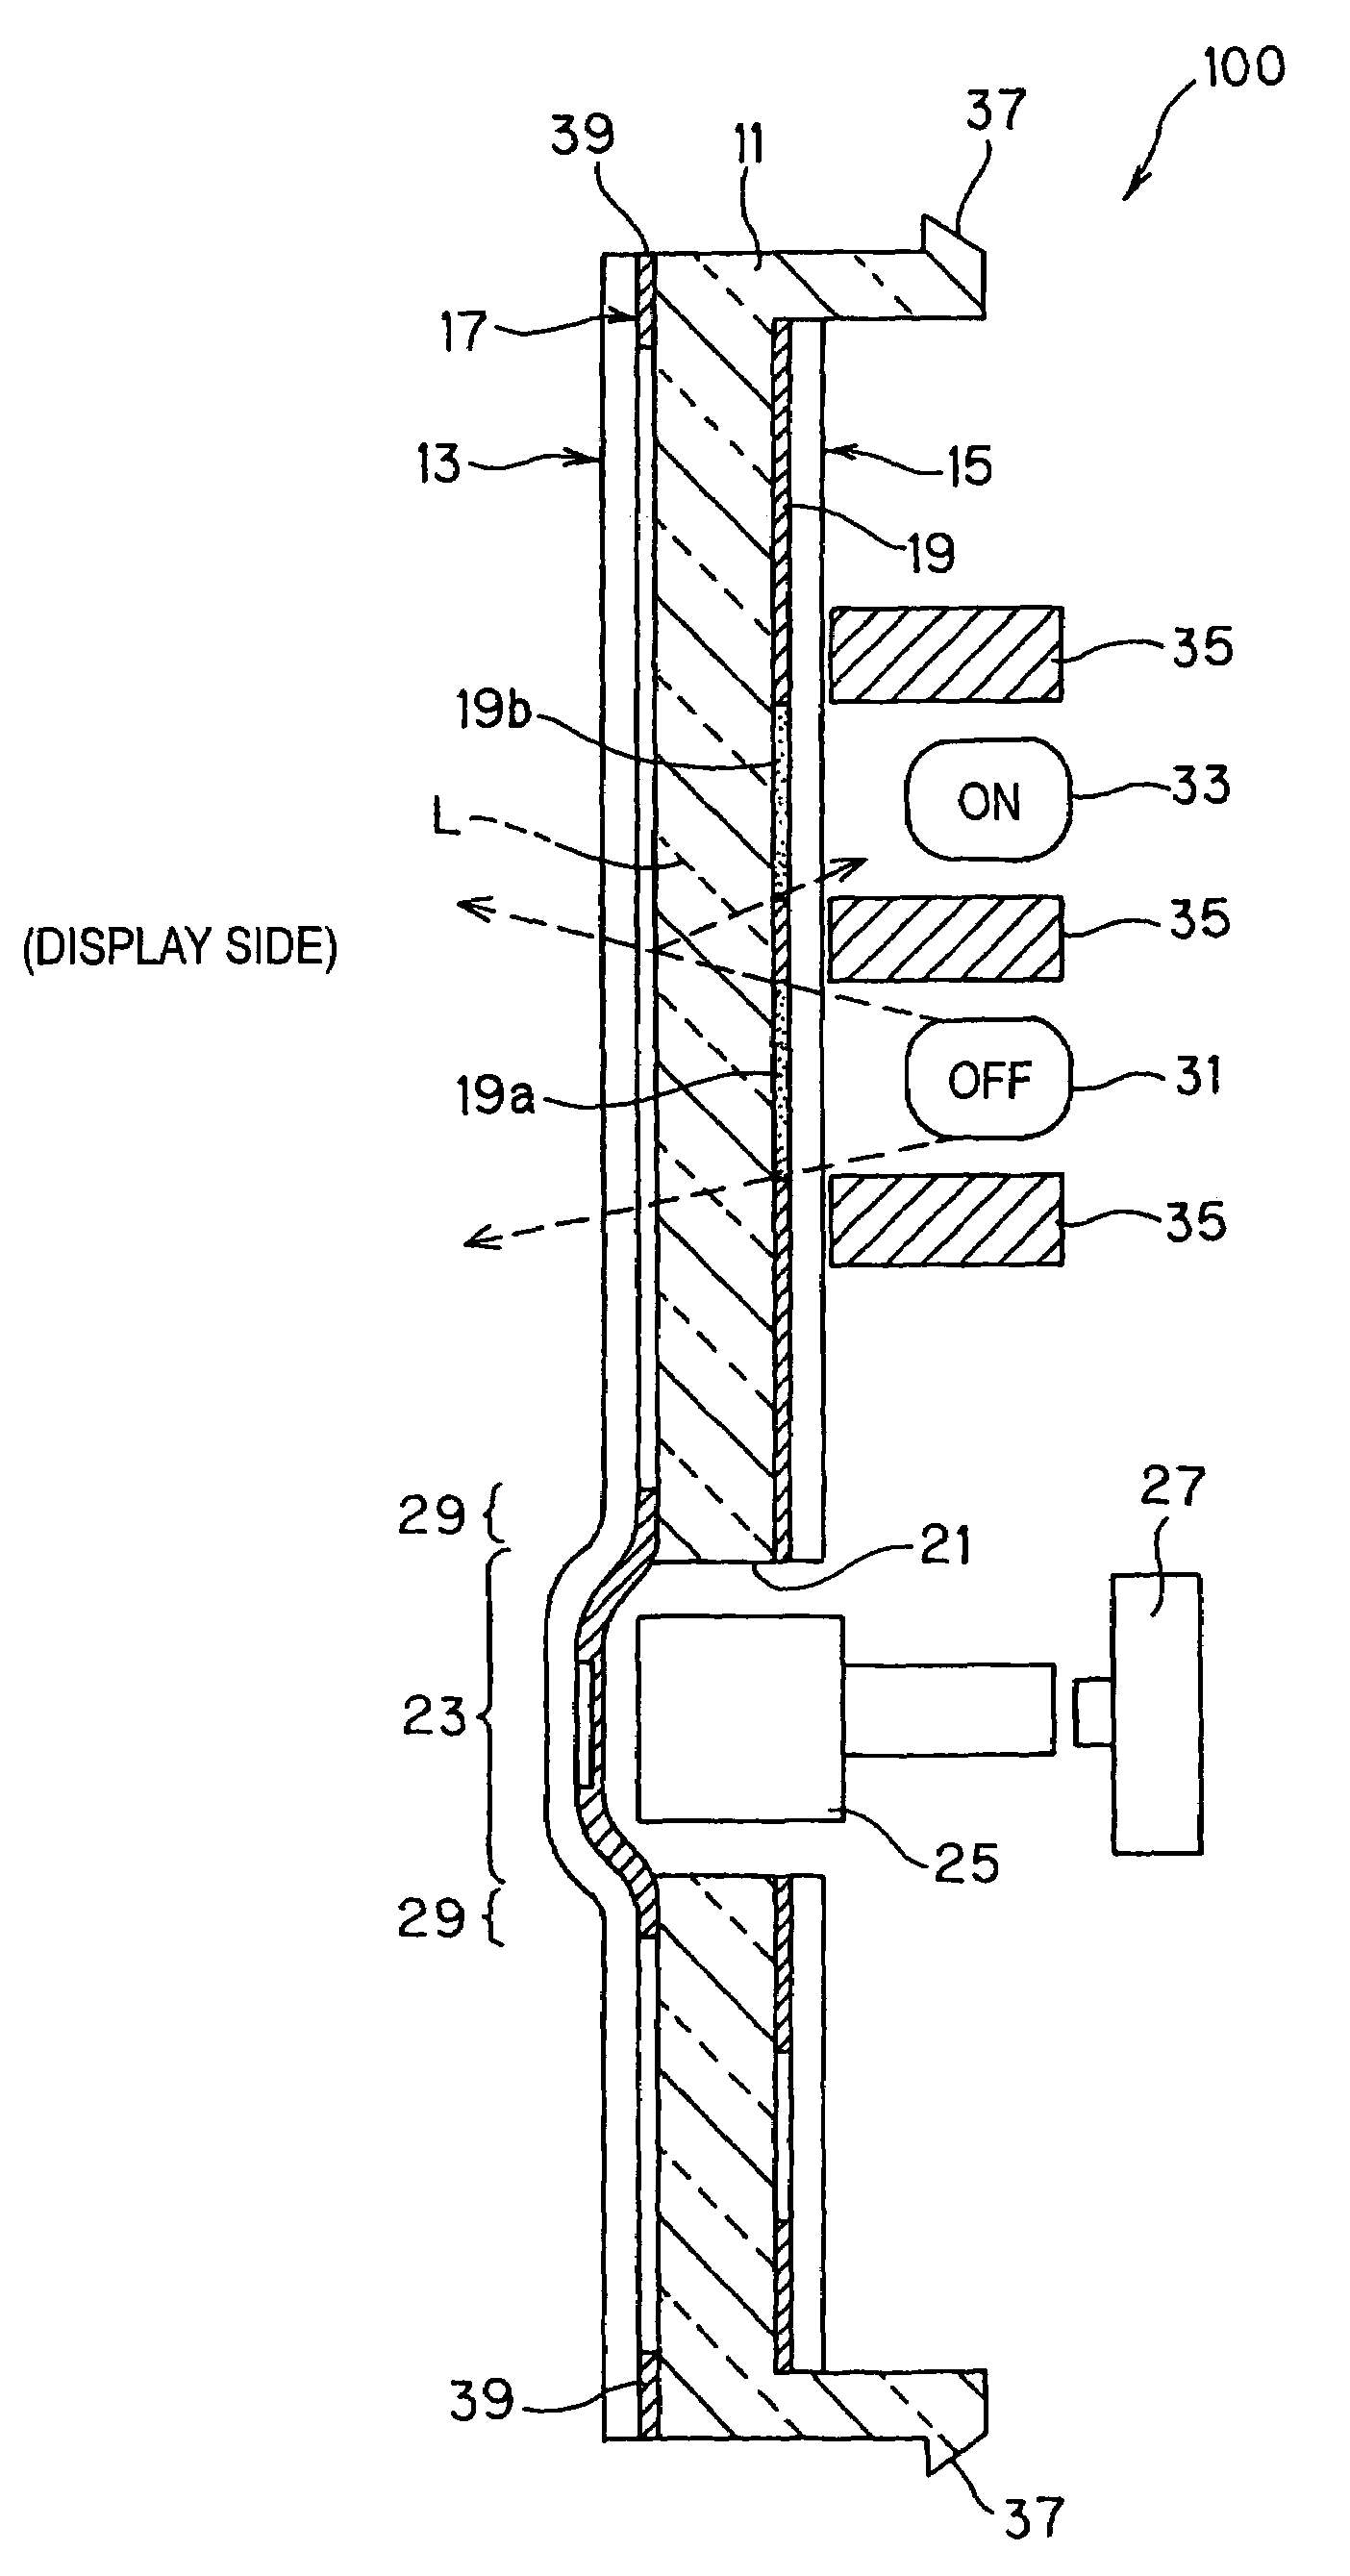 Display panel, control display panel and method for integrally molding insert material